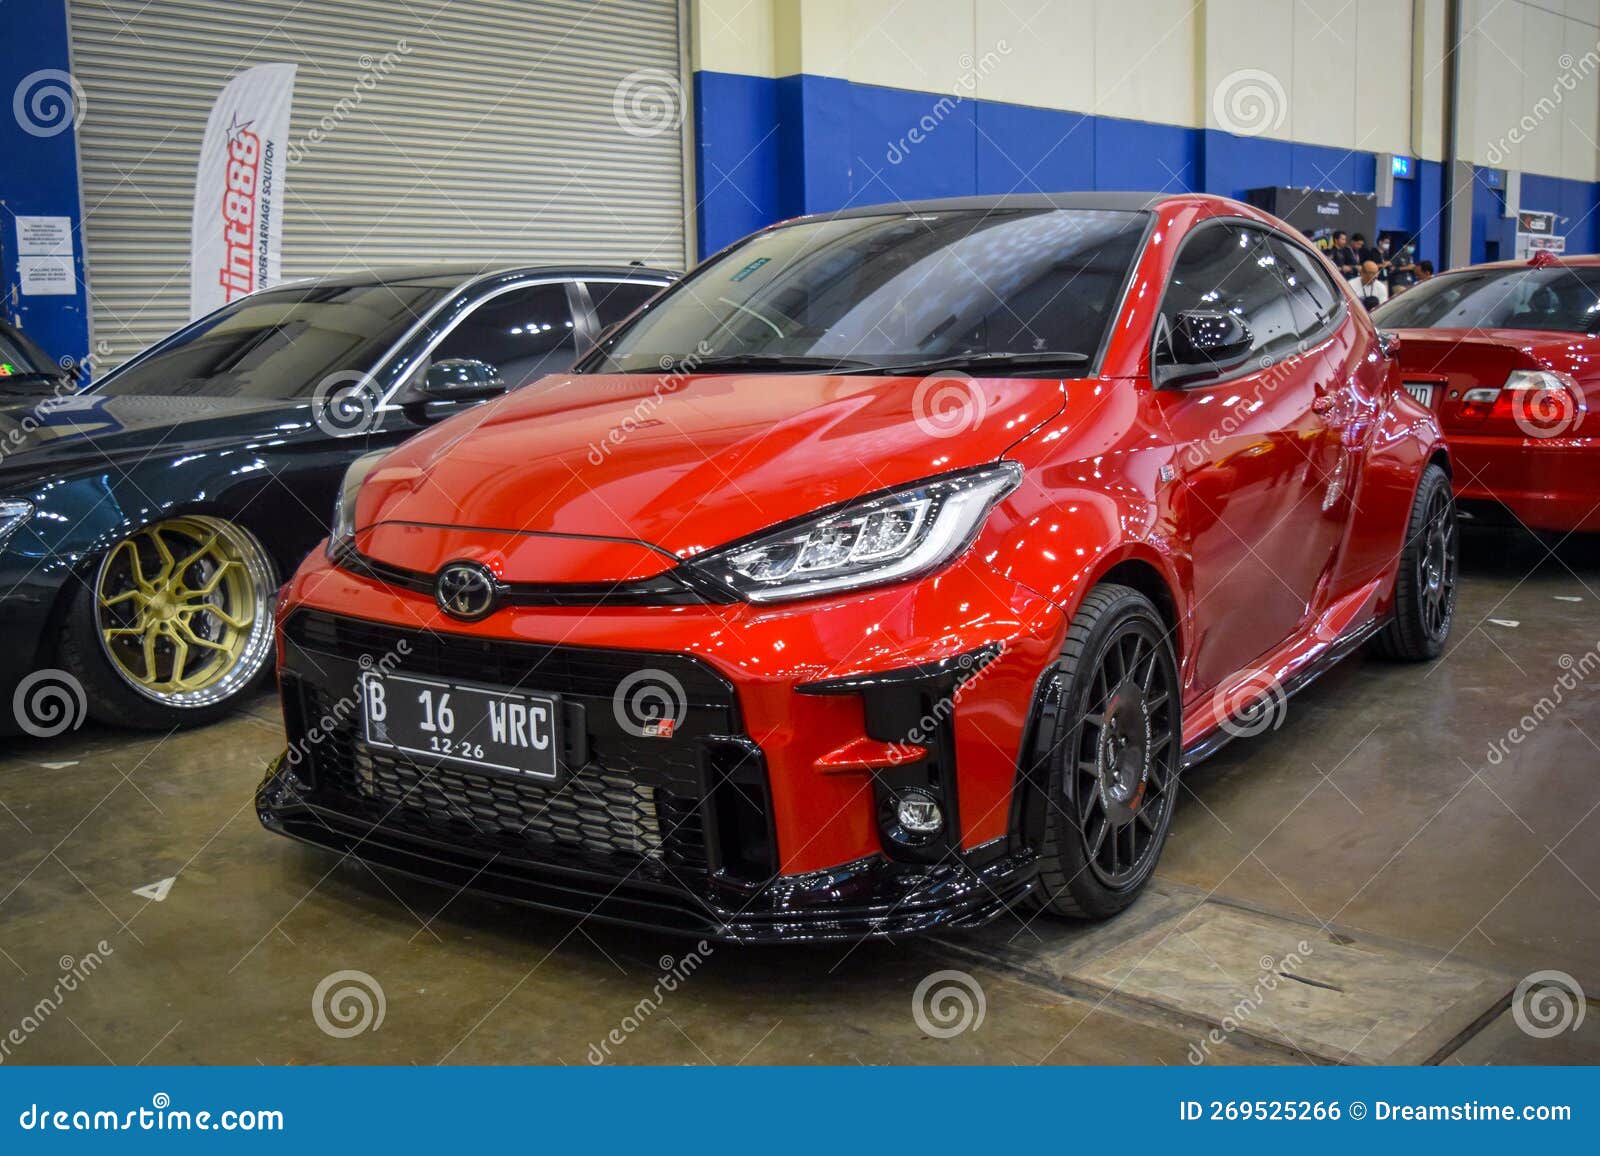 https://thumbs.dreamstime.com/z/south-tangerang-indonesia-february-toyota-gr-yaris-variant-oriented-toyota-yaris-vehicle-manufactured-toyota-269525266.jpg